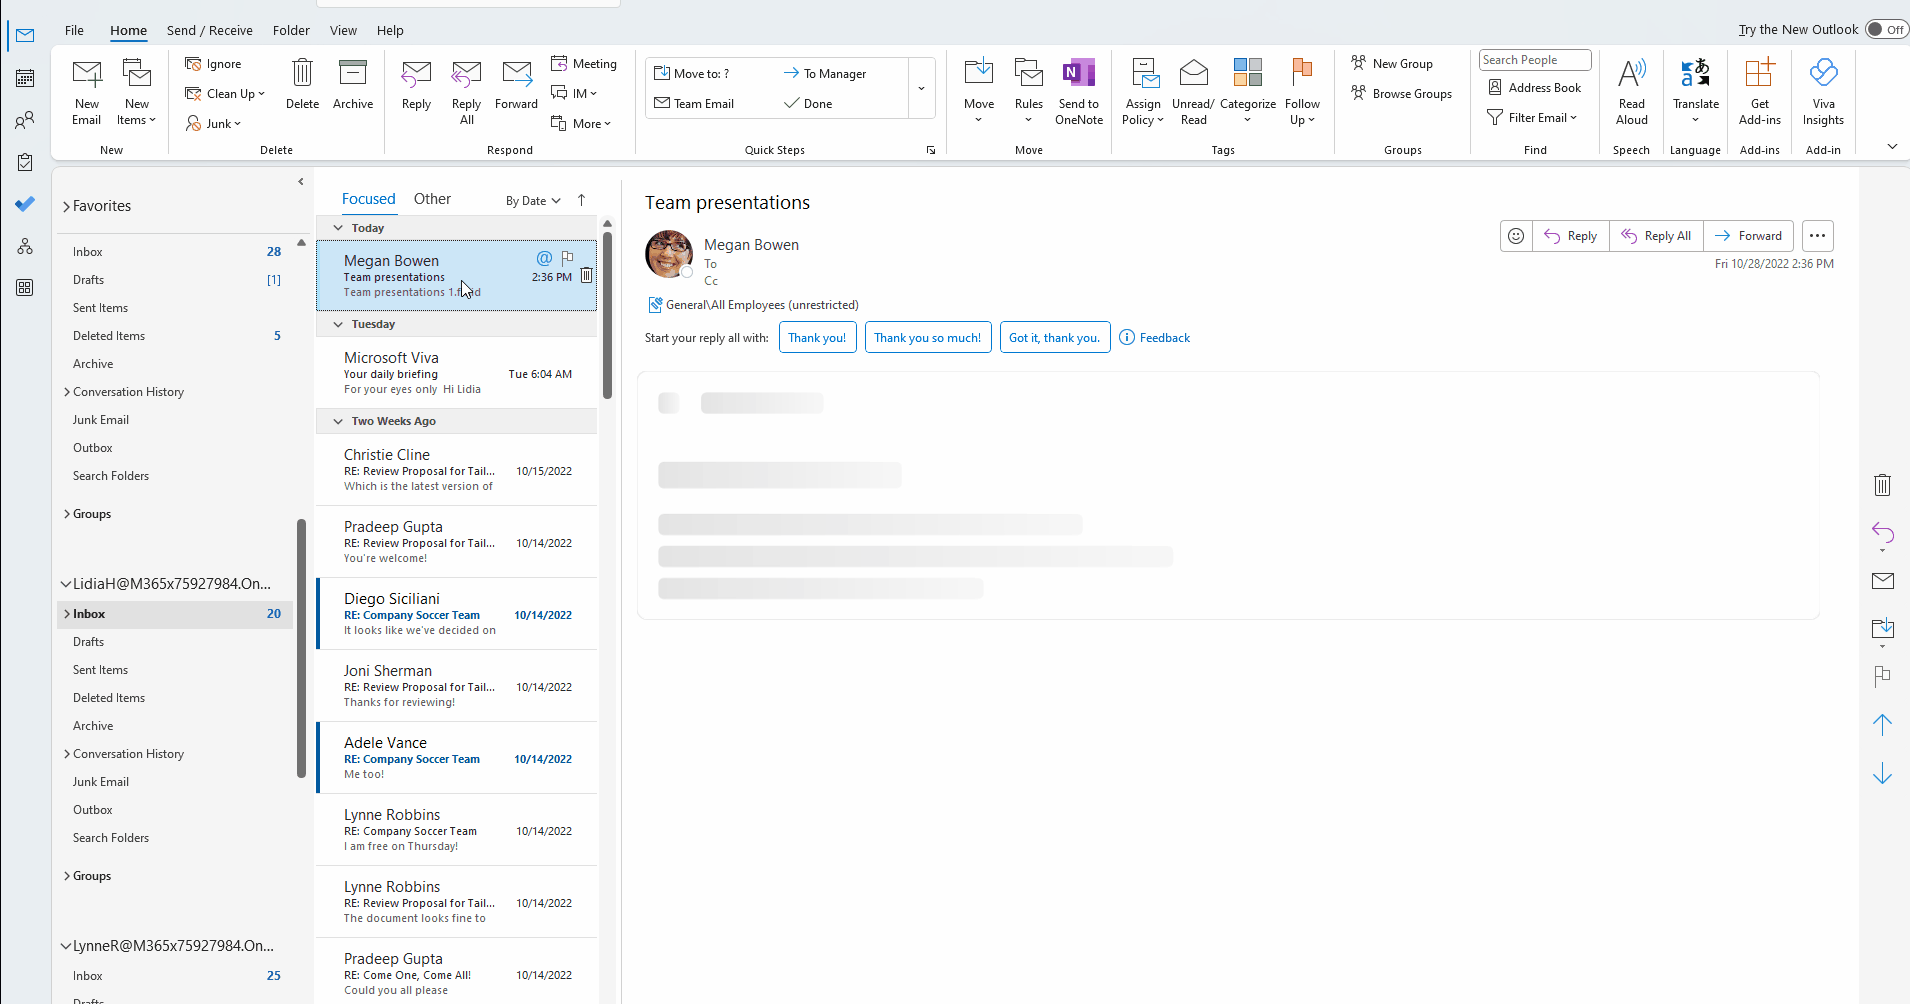 Add a Microsoft Loop component to Outlook email 